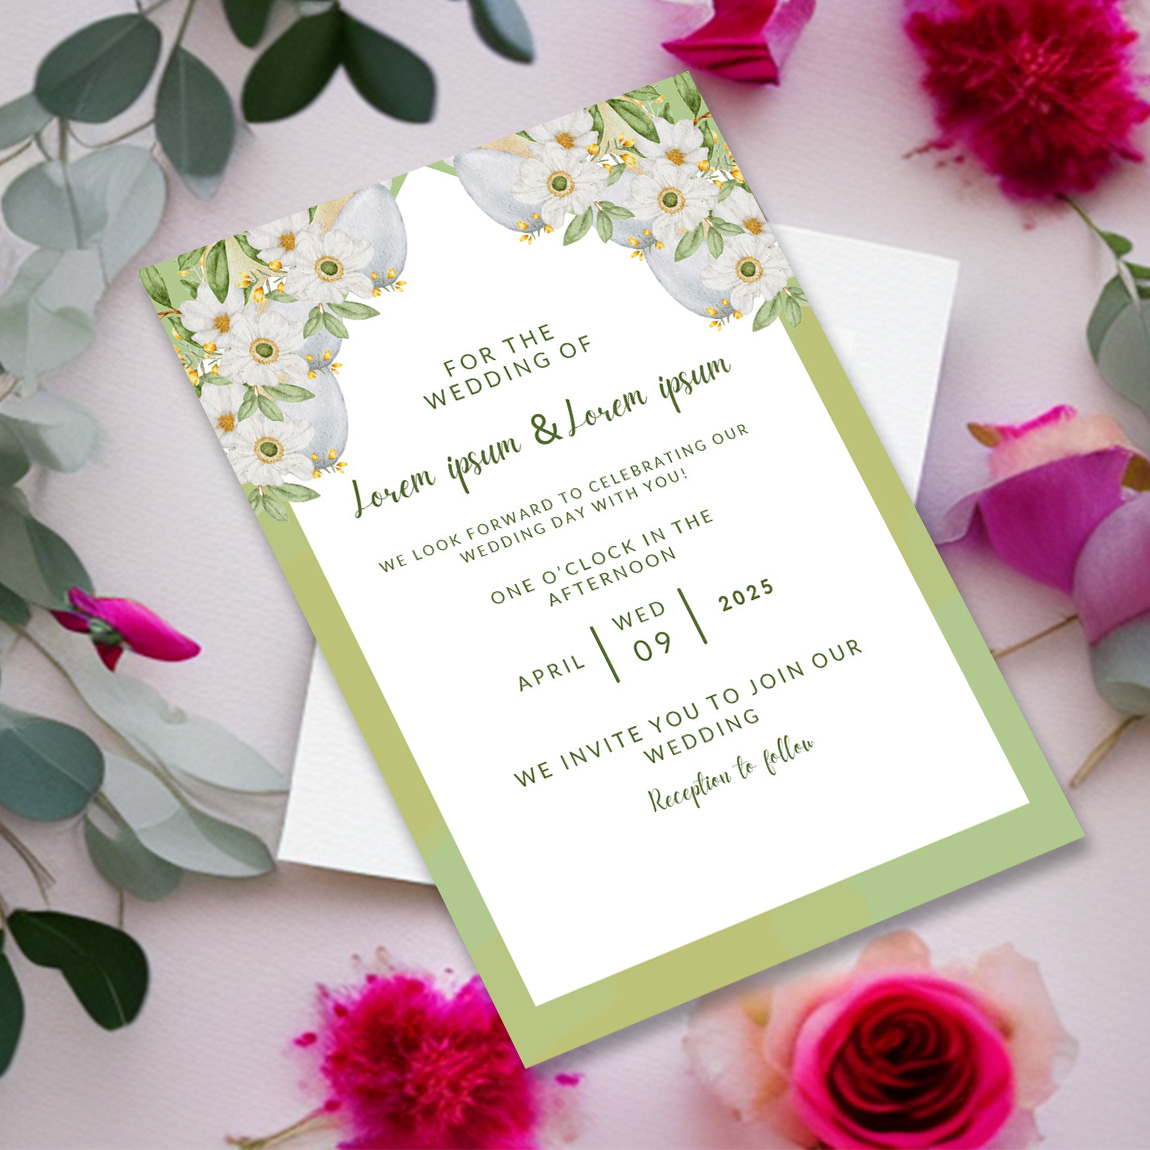 Image with beautiful wedding invitation in light green colors with white flower.